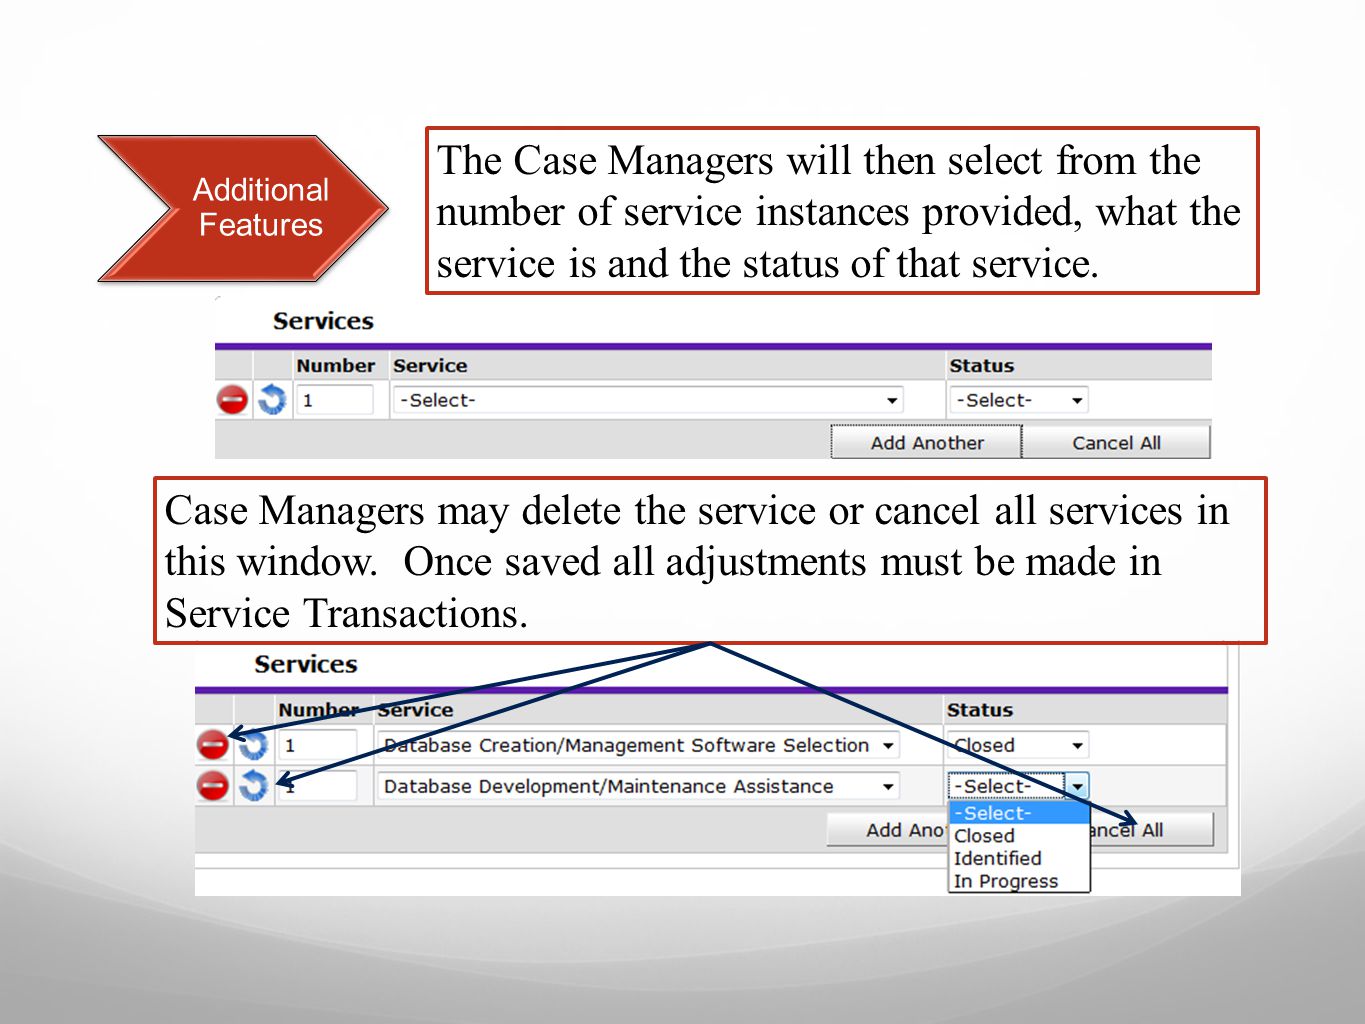 Additional Features The Case Managers will then select from the number of service instances provided, what the service is and the status of that service.